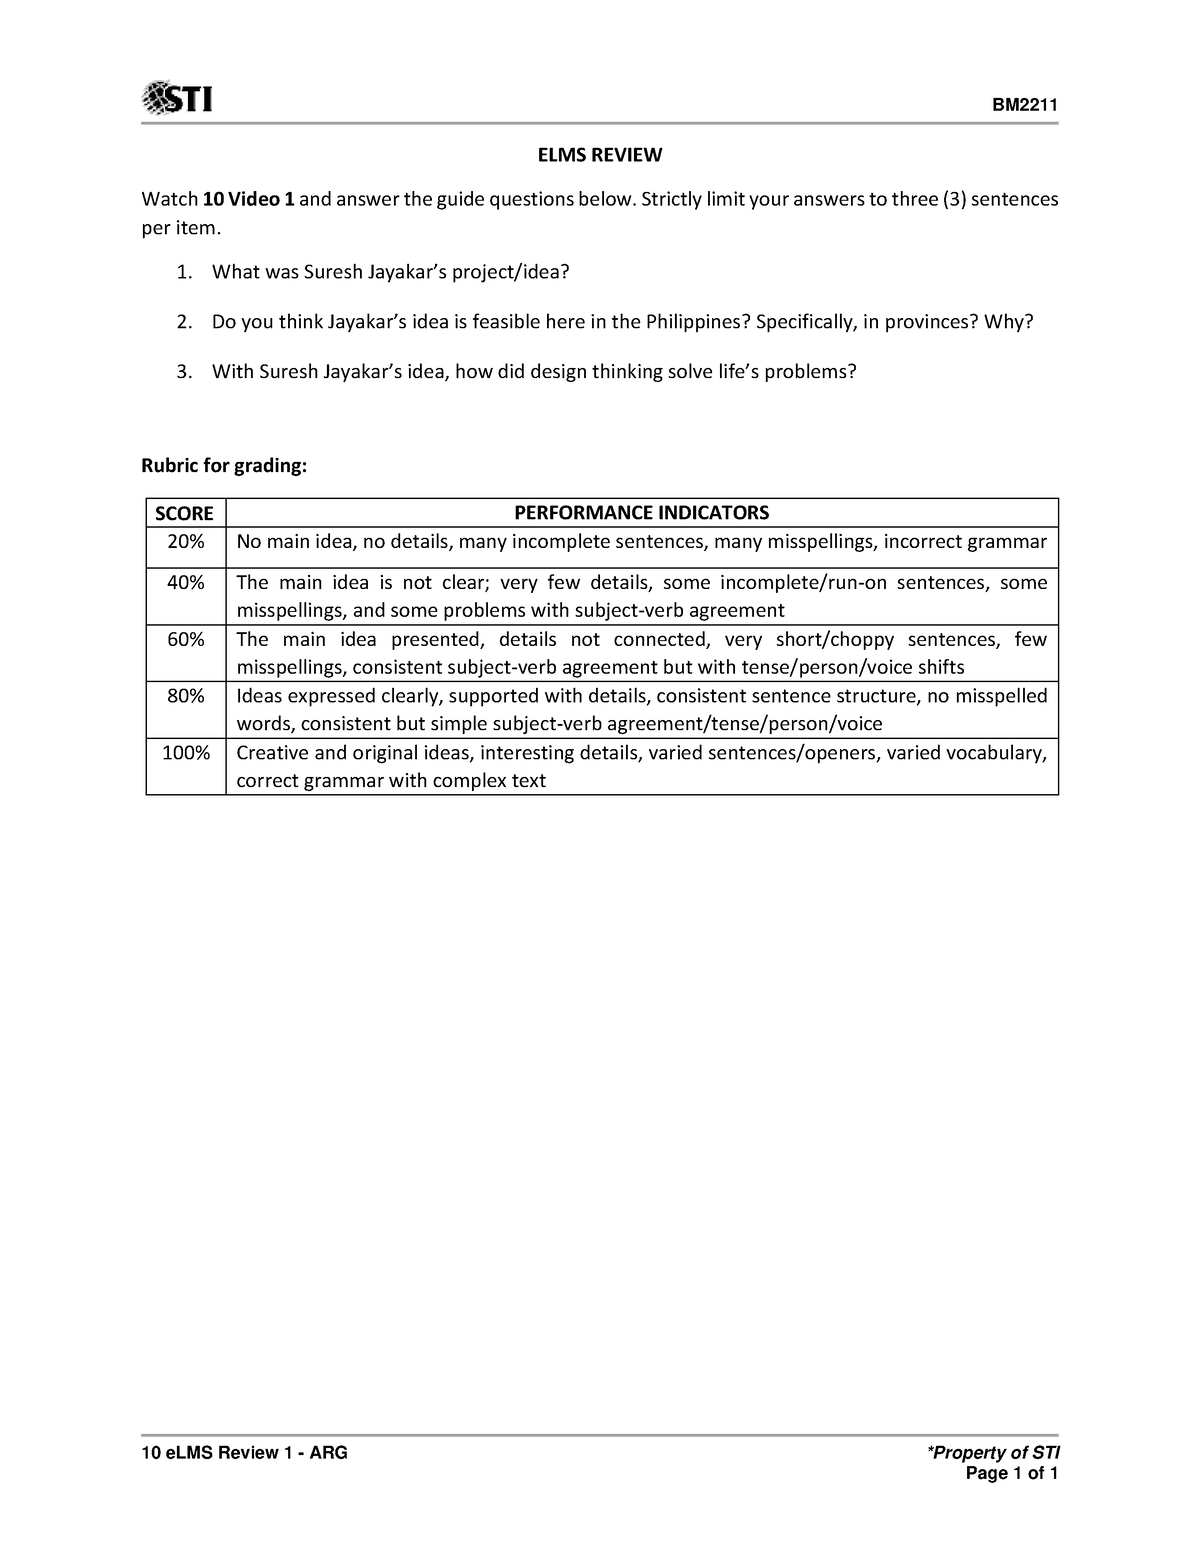 handout12234566 - BM 10 eLMS Review 1 - ARG *Property of STI Page 1 of ...